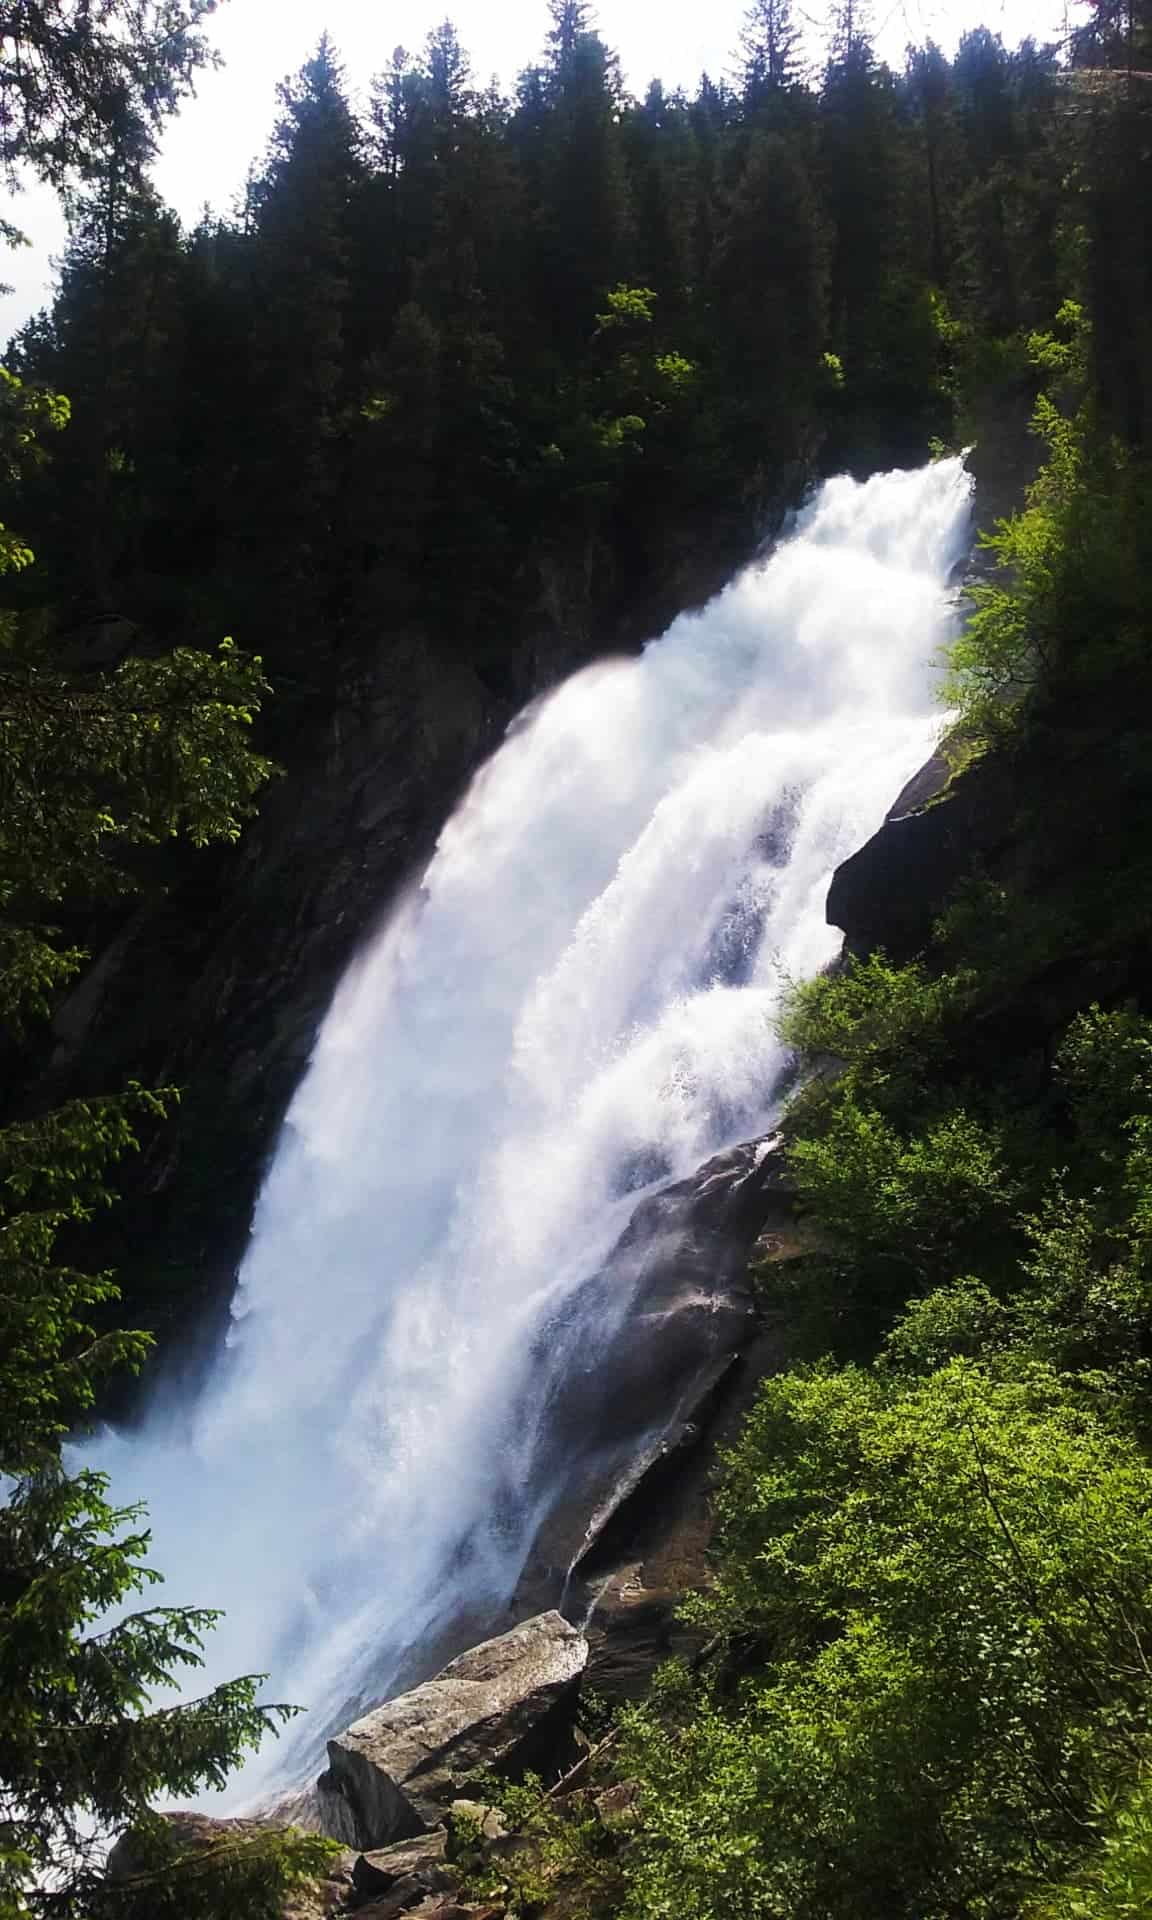 Krimml Falls, Austria - one of Europe's most spectacular natural wonders!